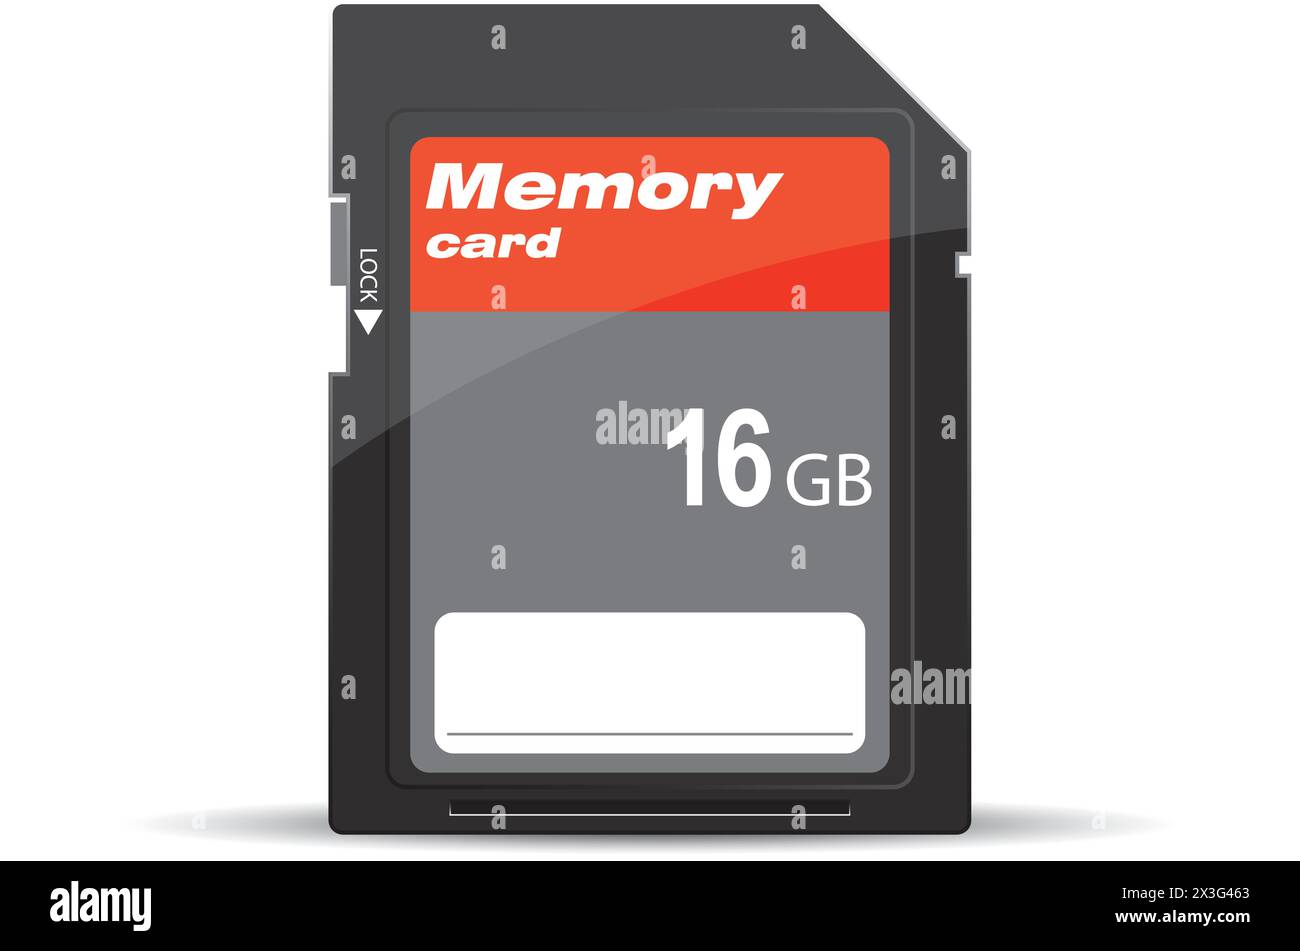 Memory card vector illustration. Isolated Stock Vector